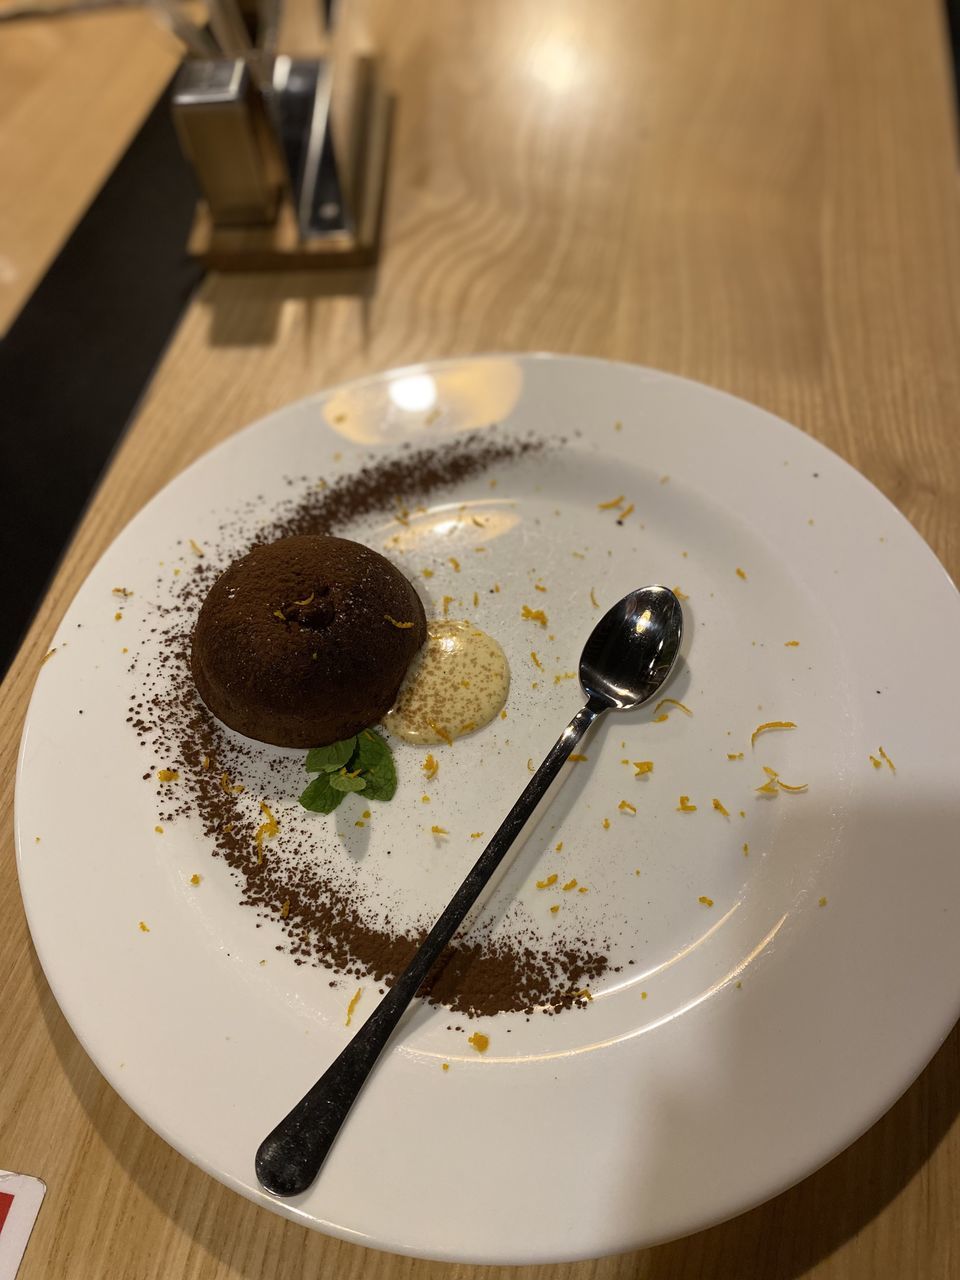 food, food and drink, plate, table, sweet food, indoors, eating utensil, sweet, dessert, kitchen utensil, freshness, no people, cake, fork, high angle view, chocolate, meal, baked, wood, icing, unhealthy eating